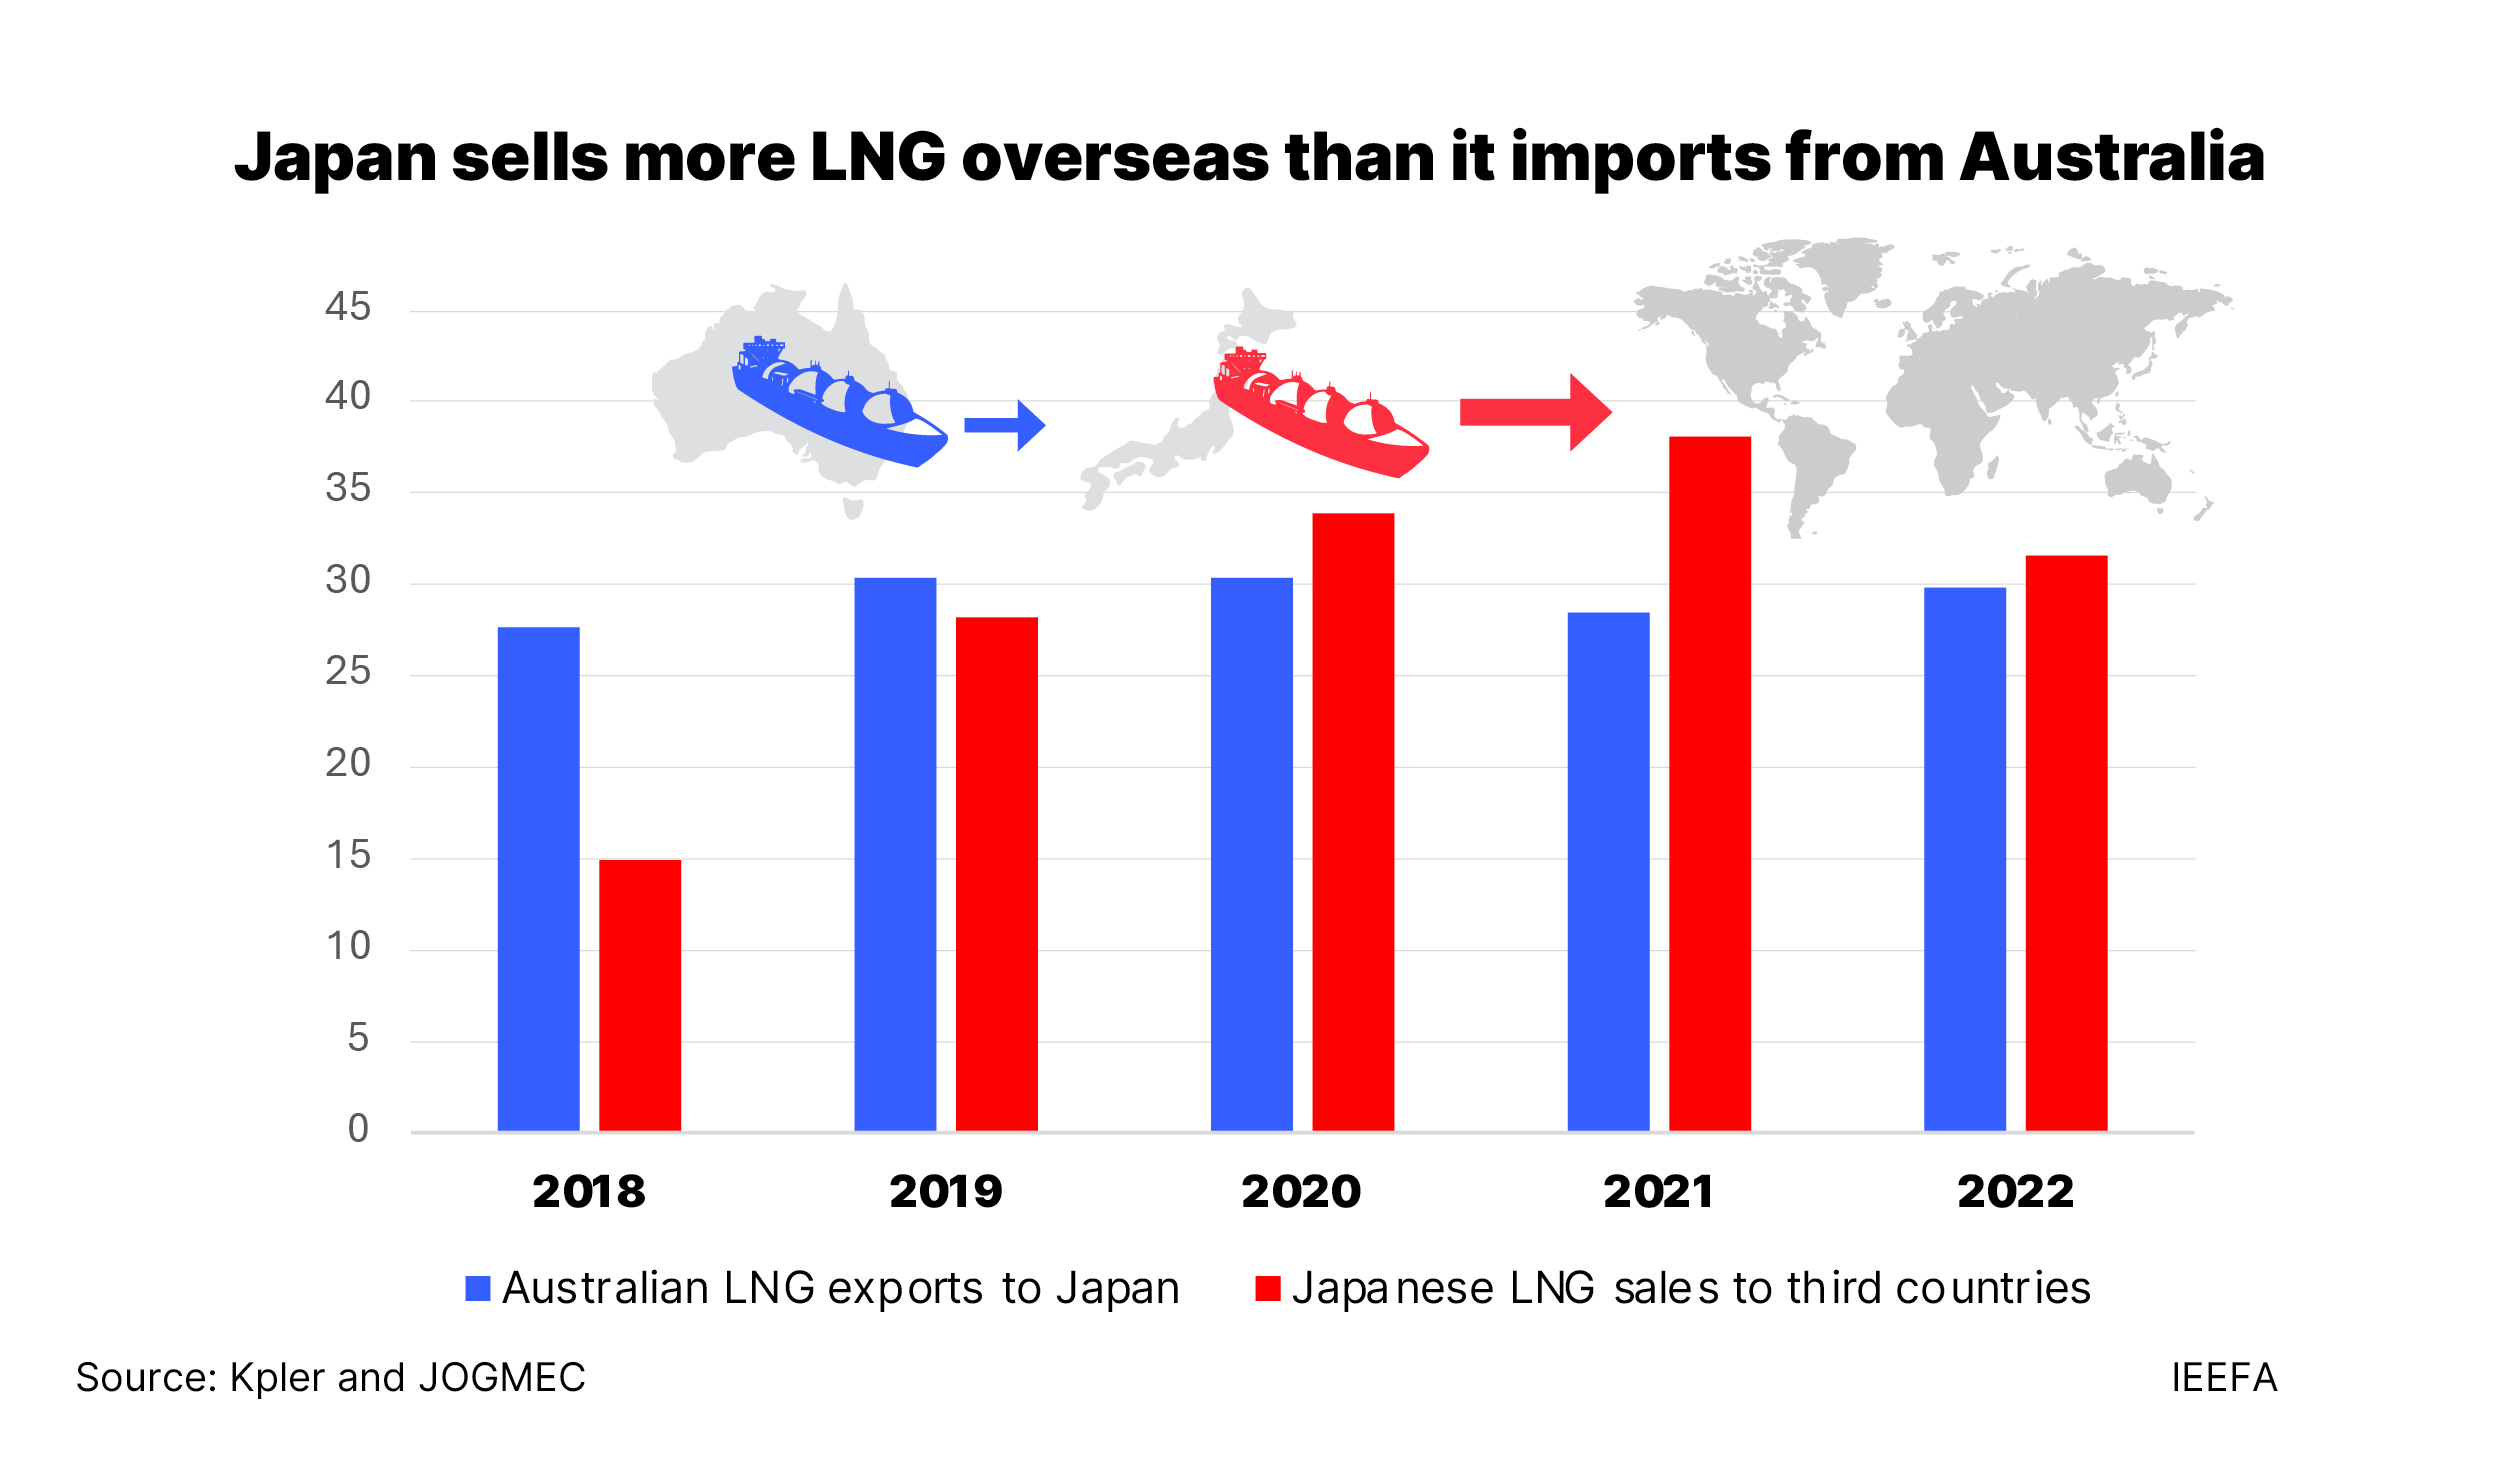 LNG sales by Japanese companies to third countries compared to Australian LNG exports to Japan